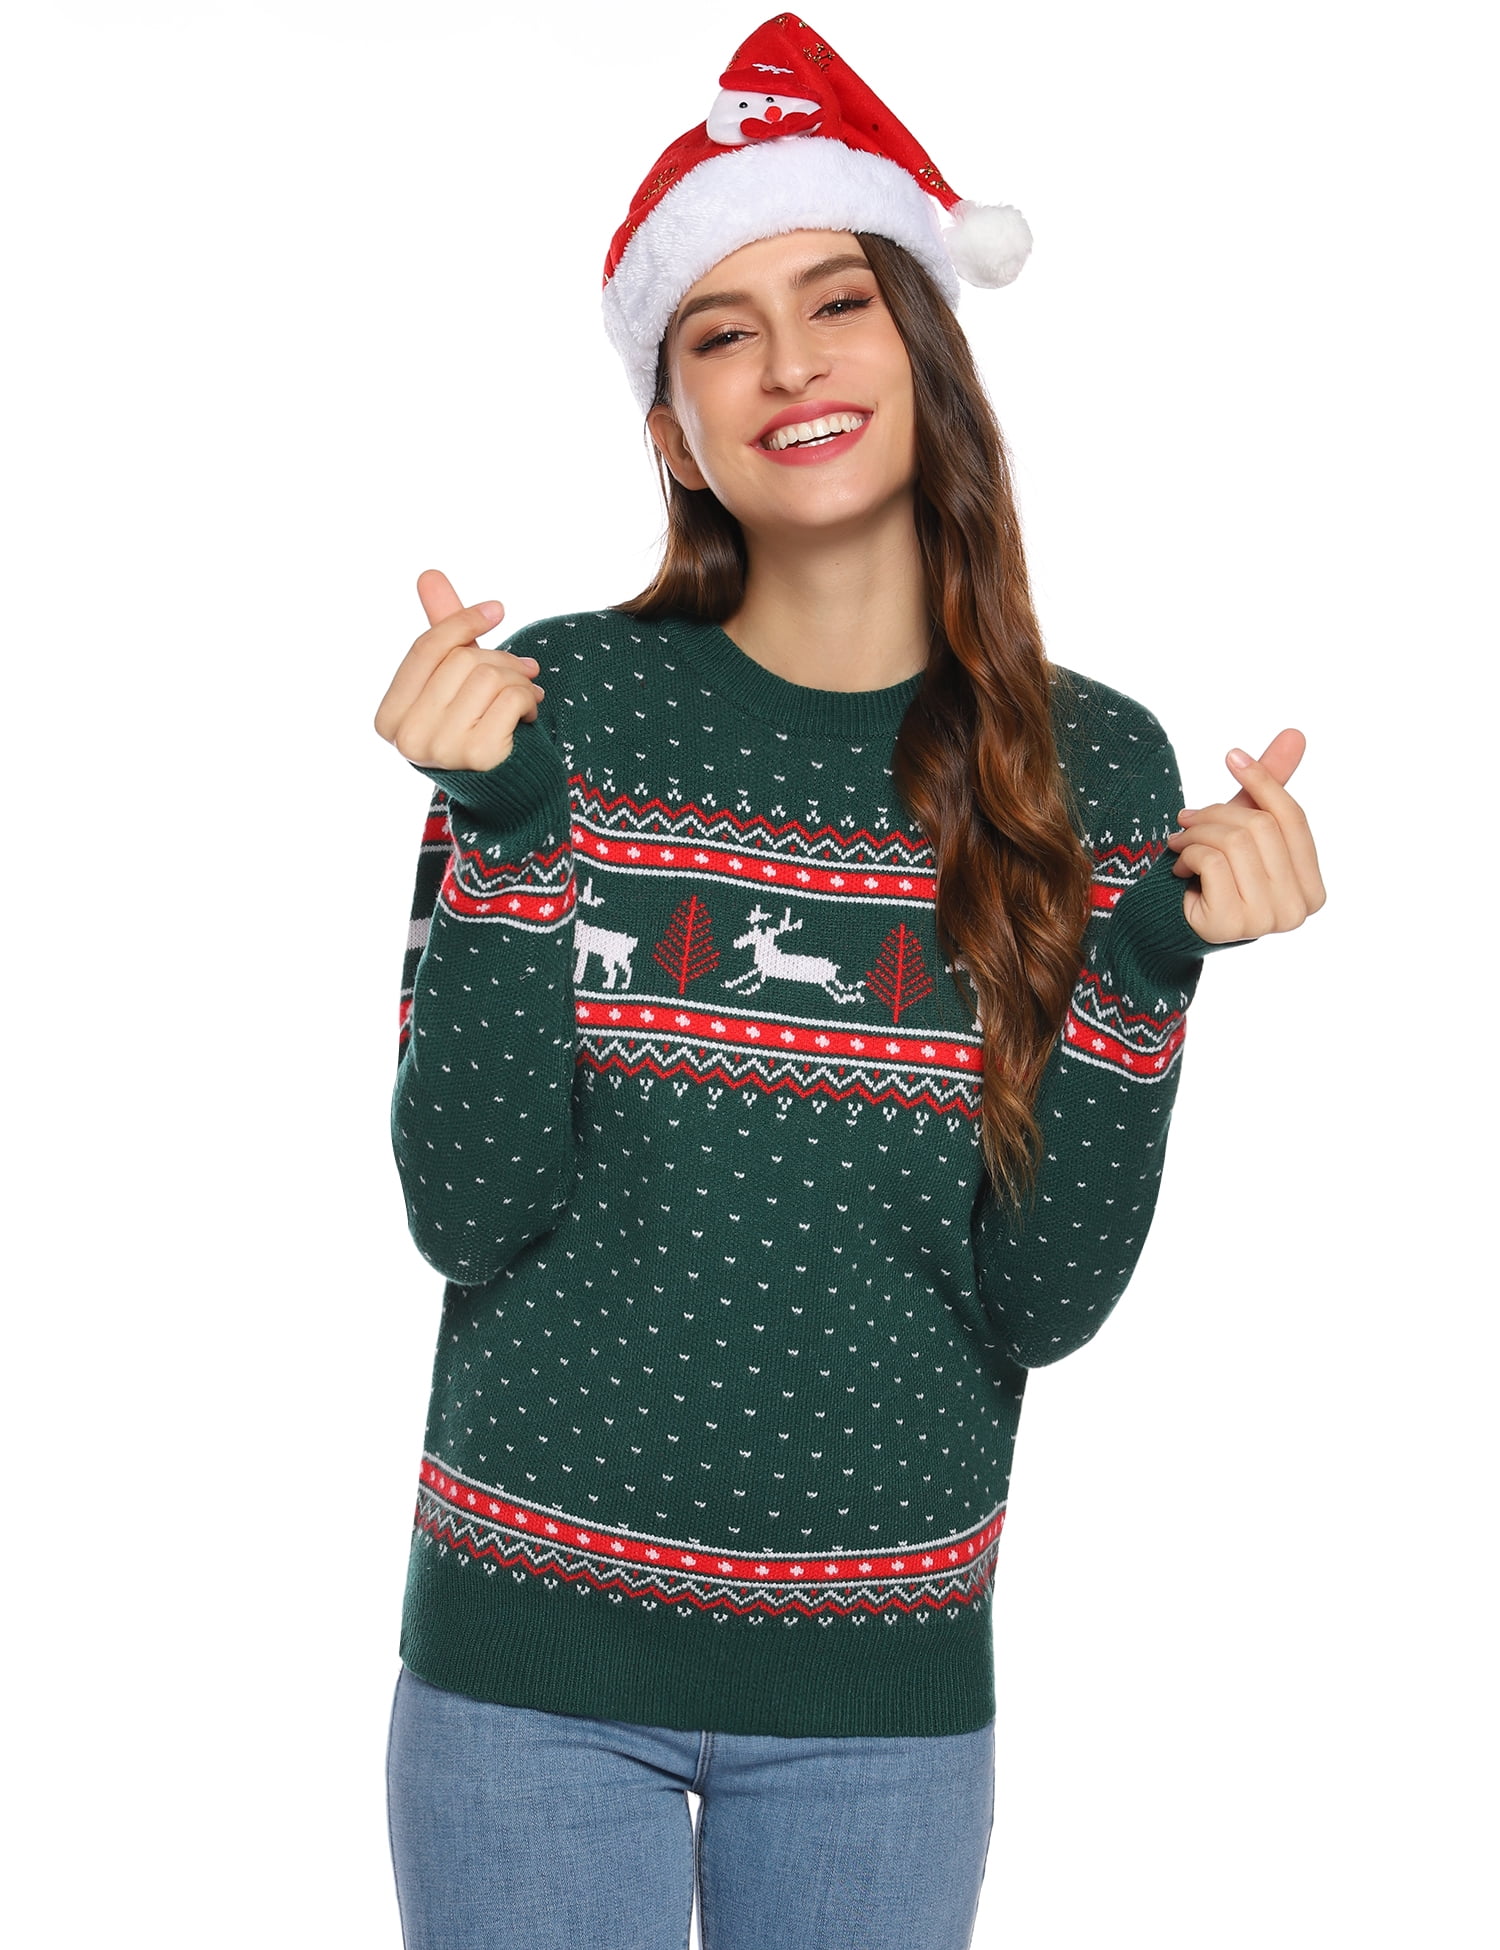 Akalnny Christmas Family Matching Sweaters Pullover Ugly Xmas Funny Knitted Sweater Knitwear for Women Men Kids